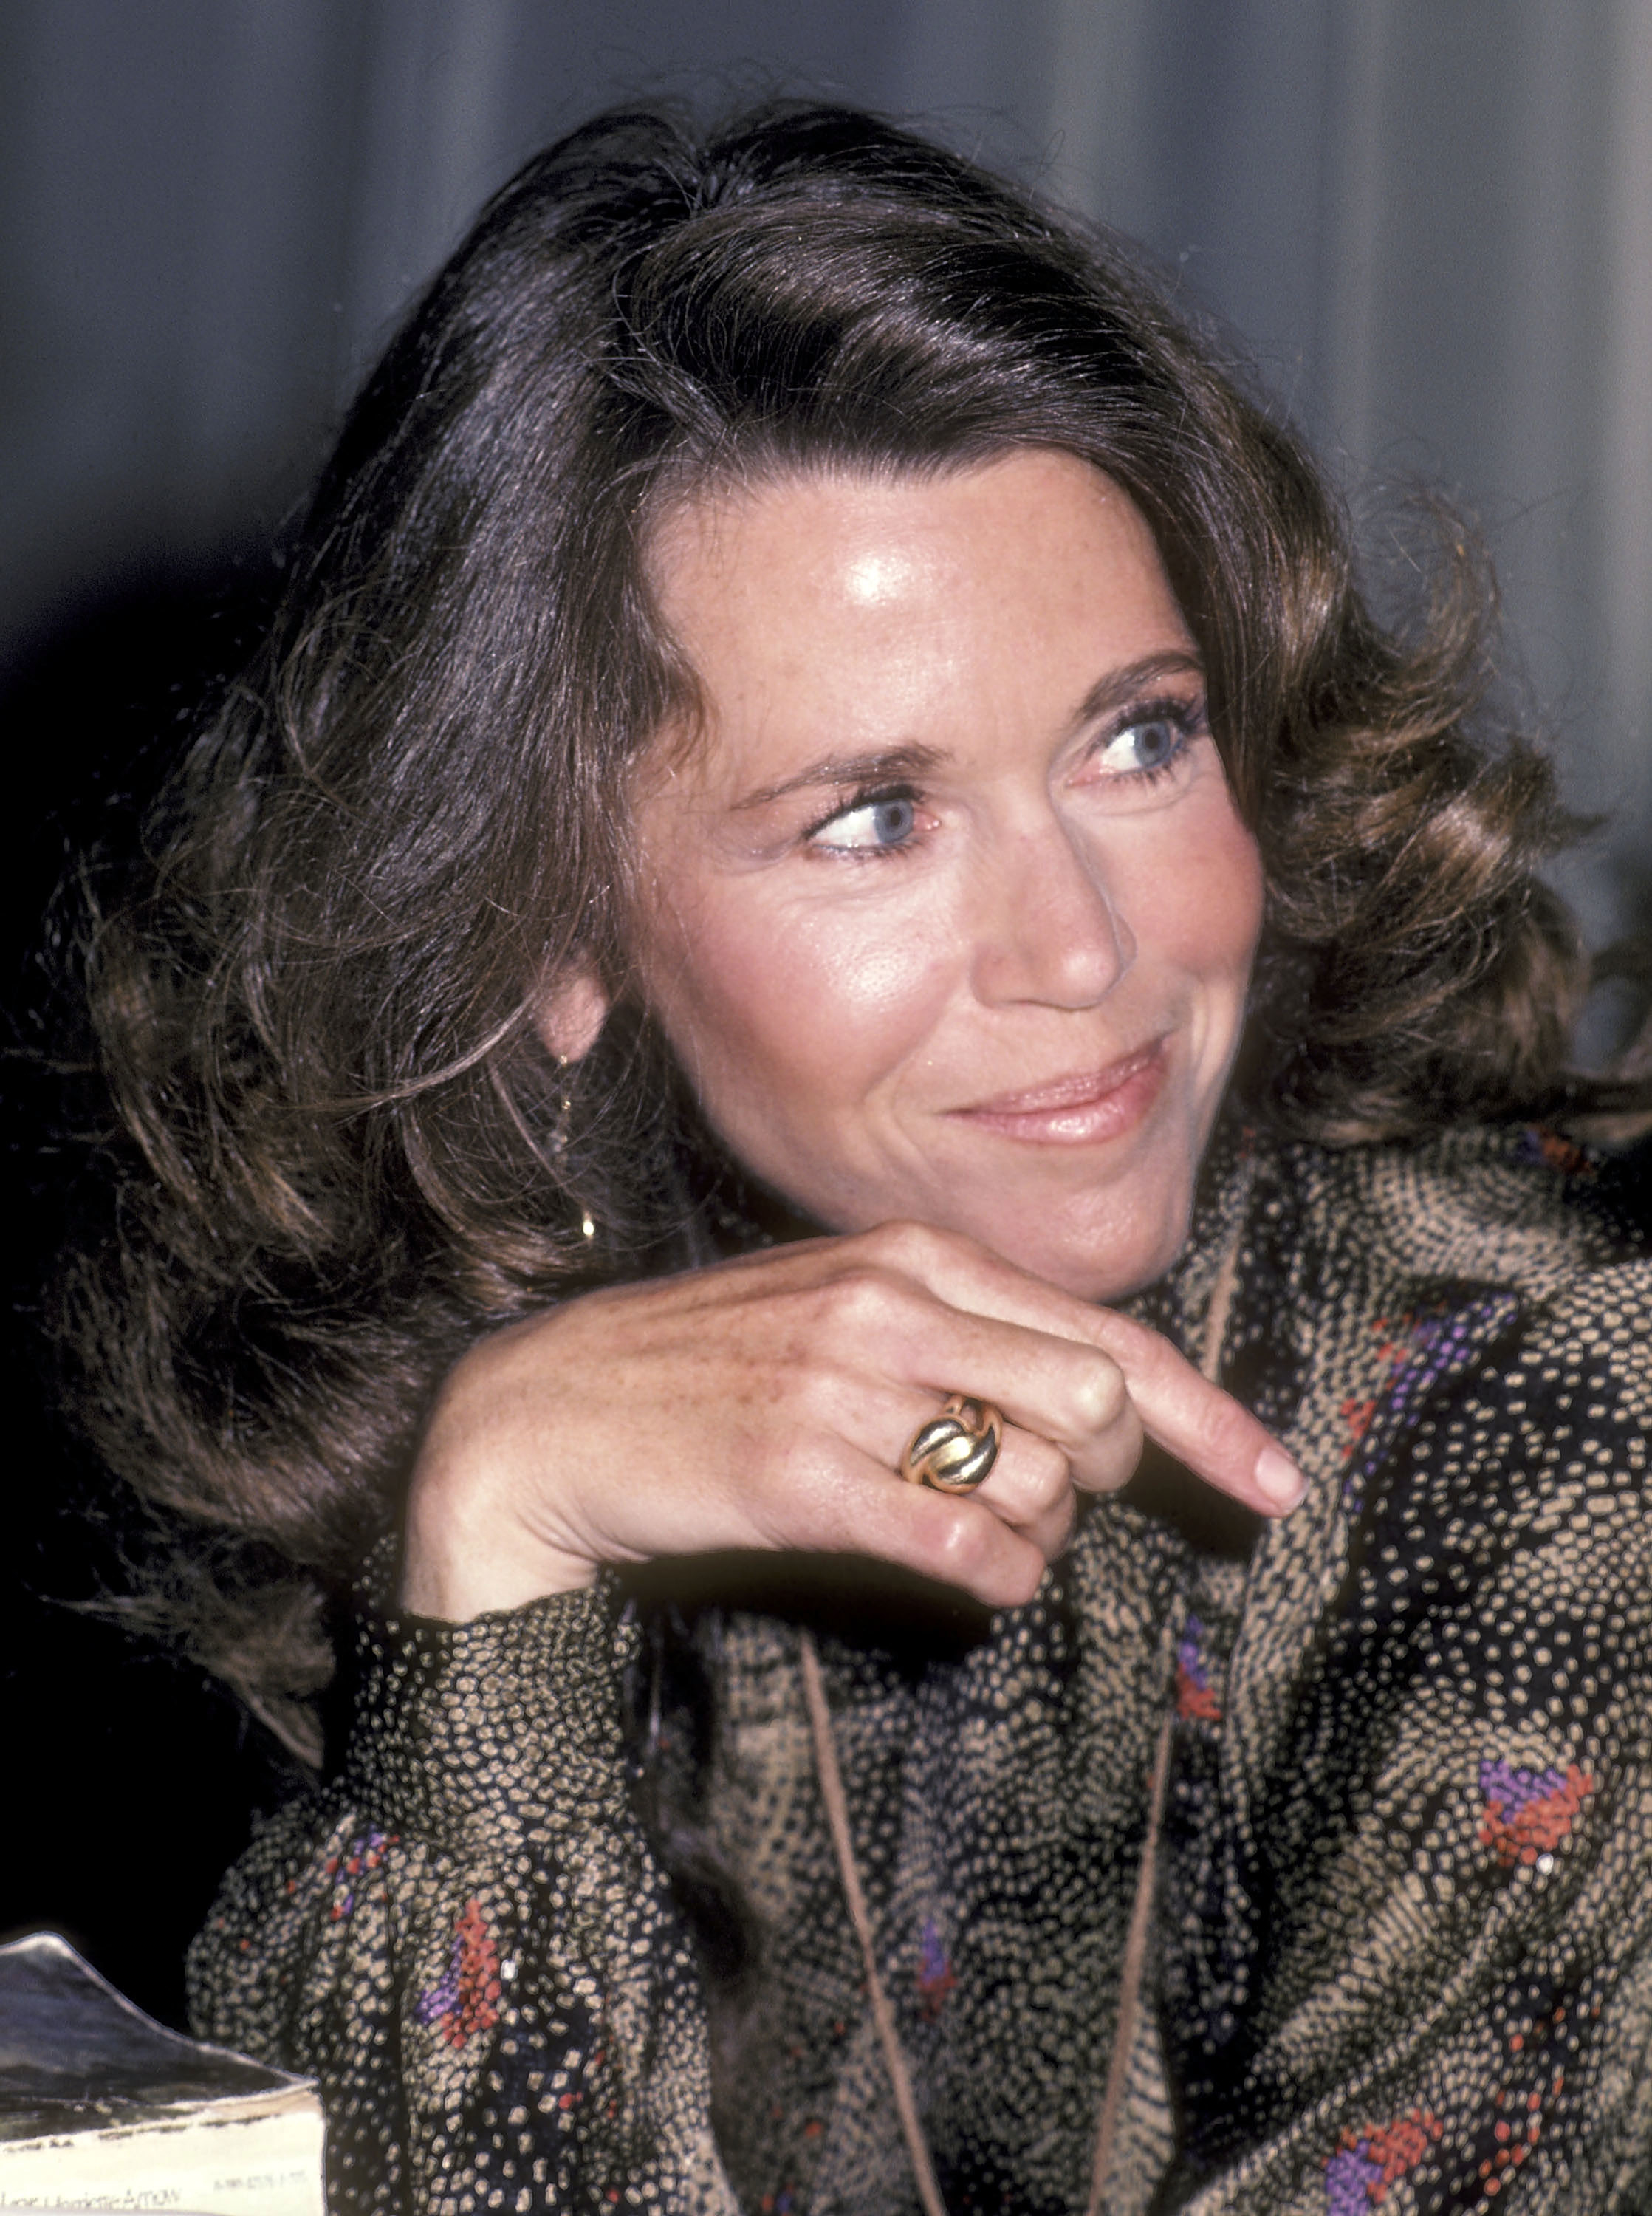 Close-up of Jane smiling with her chin resting on her hand, wearing a patterned top